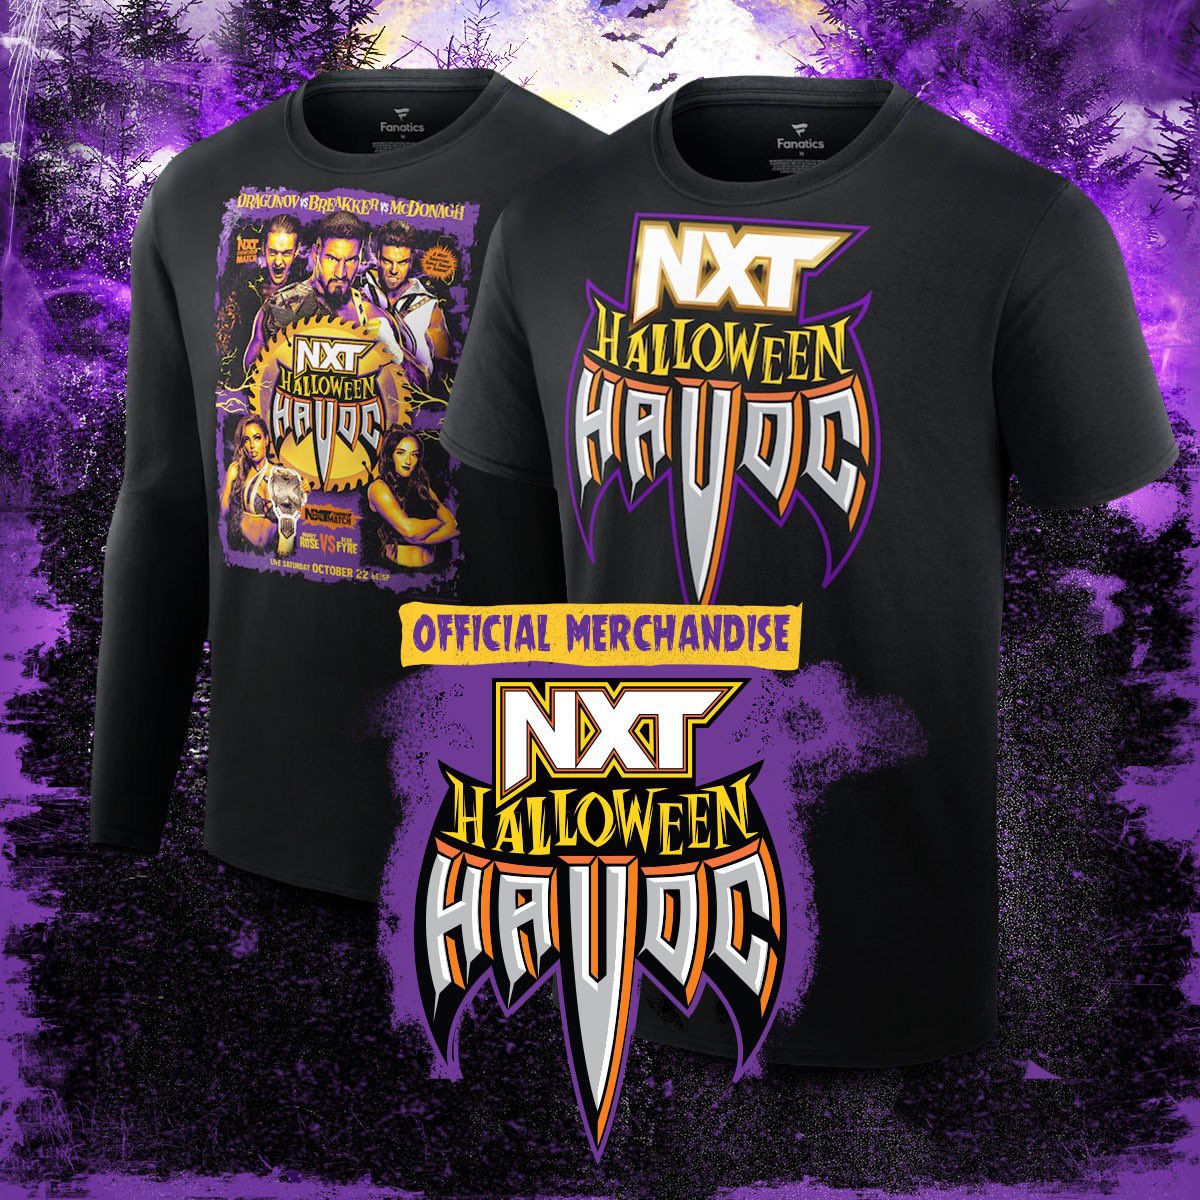 Get your NXT Halloween Havoc merch today! Available now at #WWEShop #WWE 🛒: bit.ly/3gtCw7o